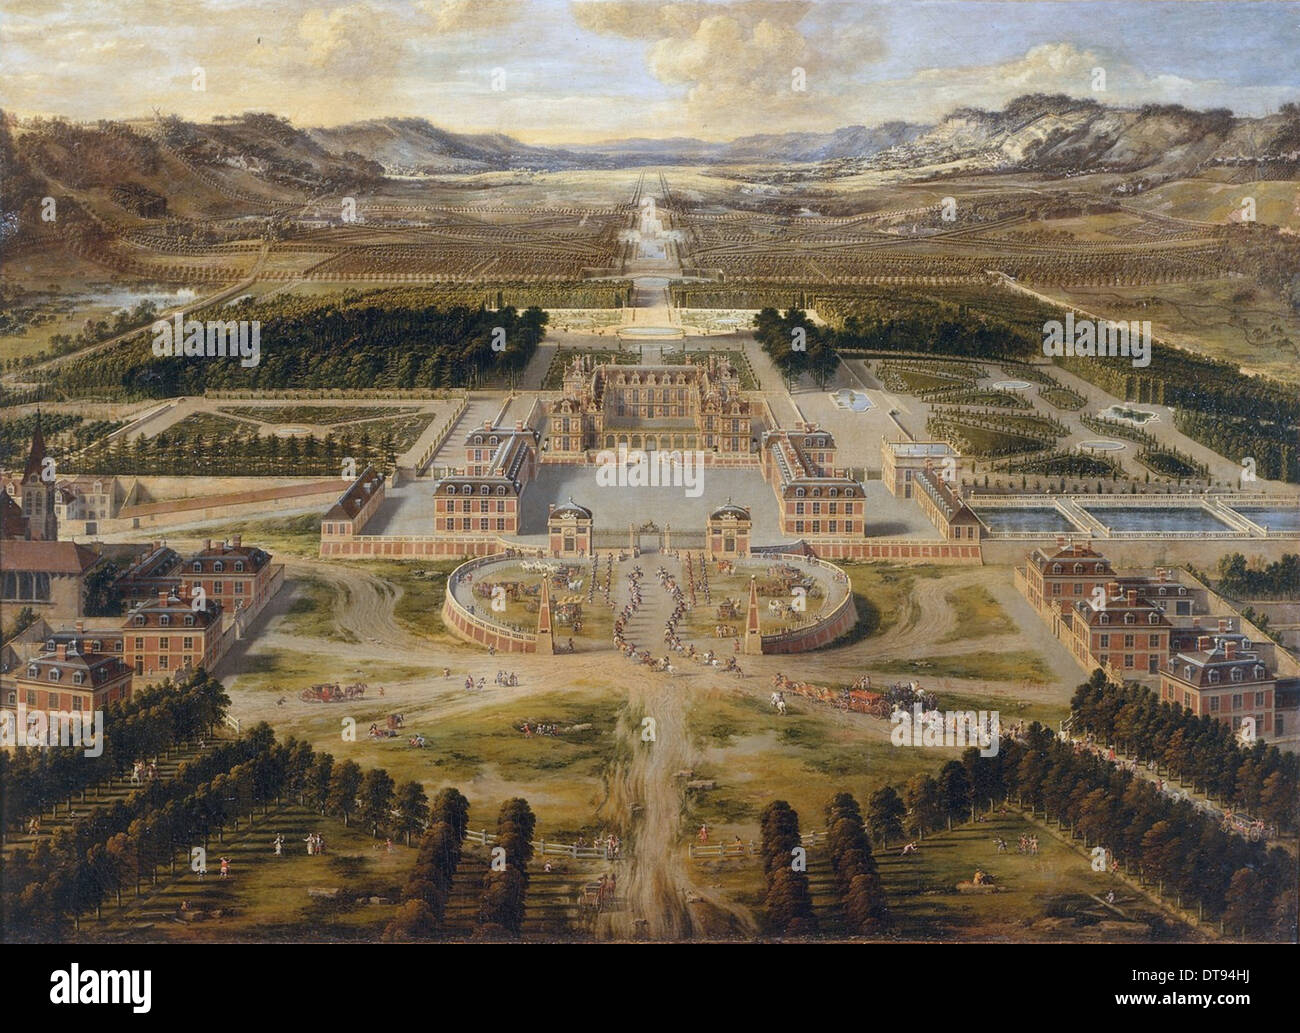 The Palace of Versailles, the Grand Trianon, ca 1668. Artist: Patel, Pierre (1605-1676) Stock Photo